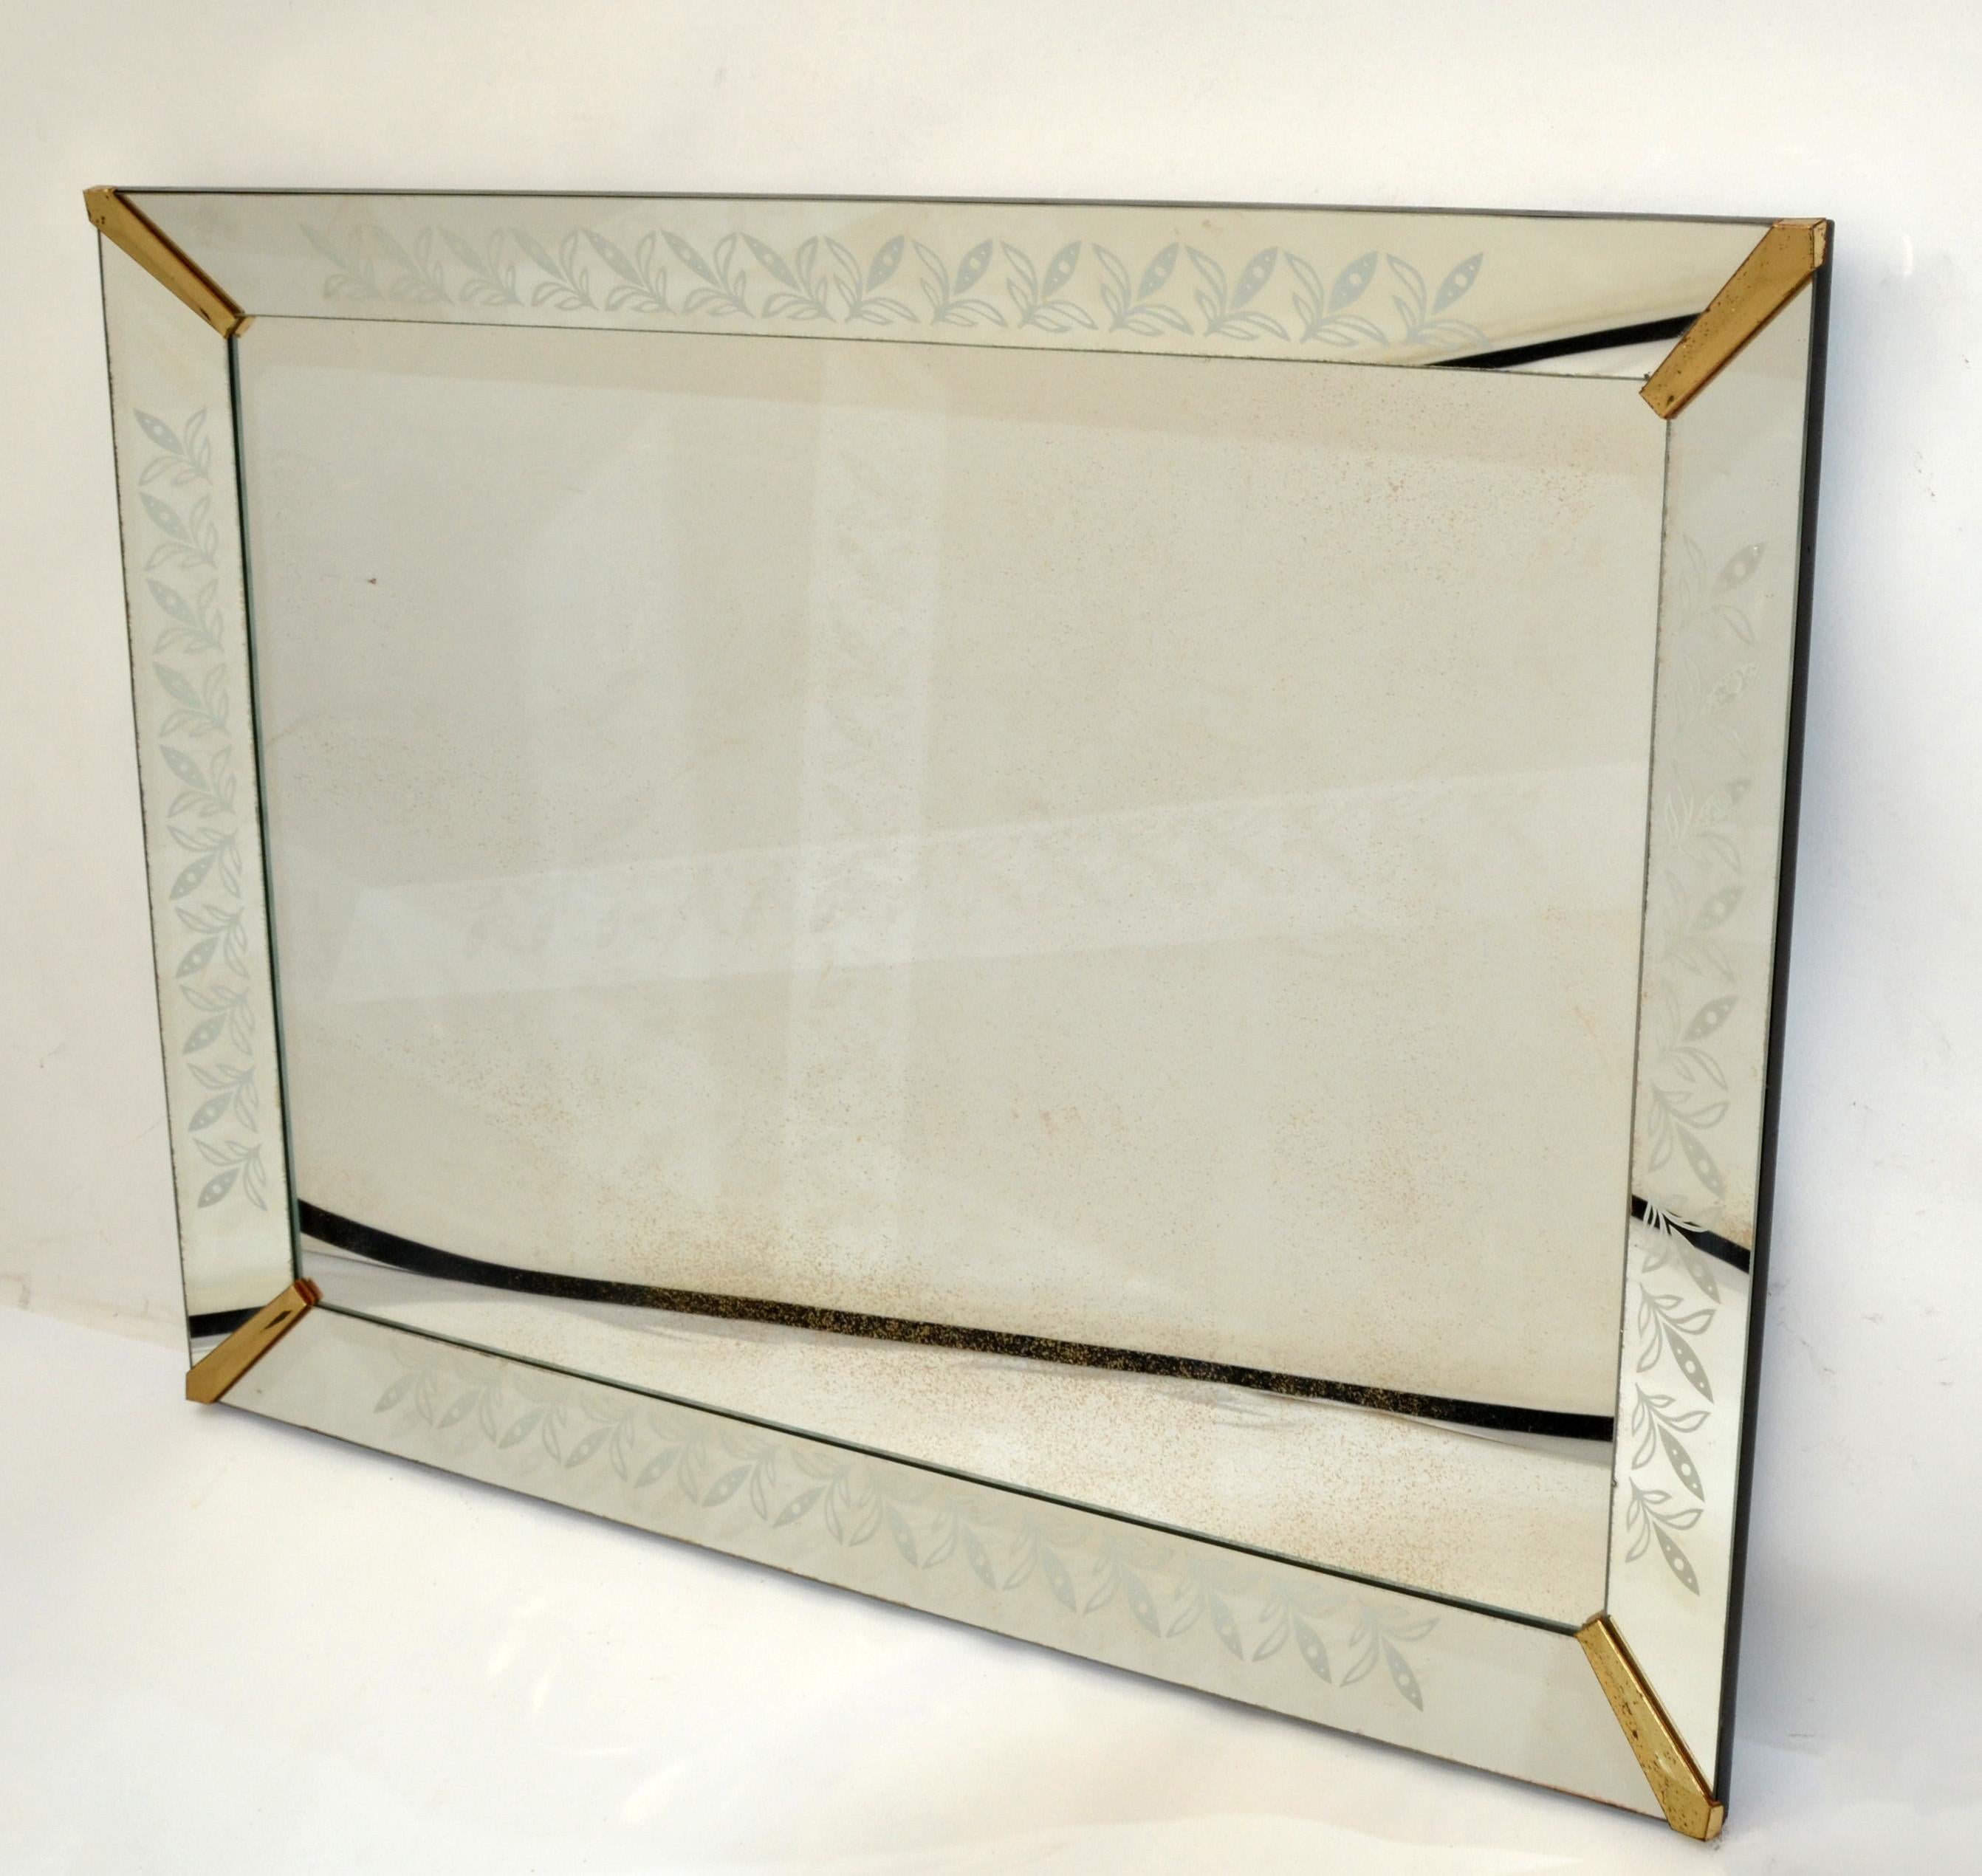 1940s Art Deco Venetian Style Etched Wall Mirror with Brass Finished Corners For Sale 10